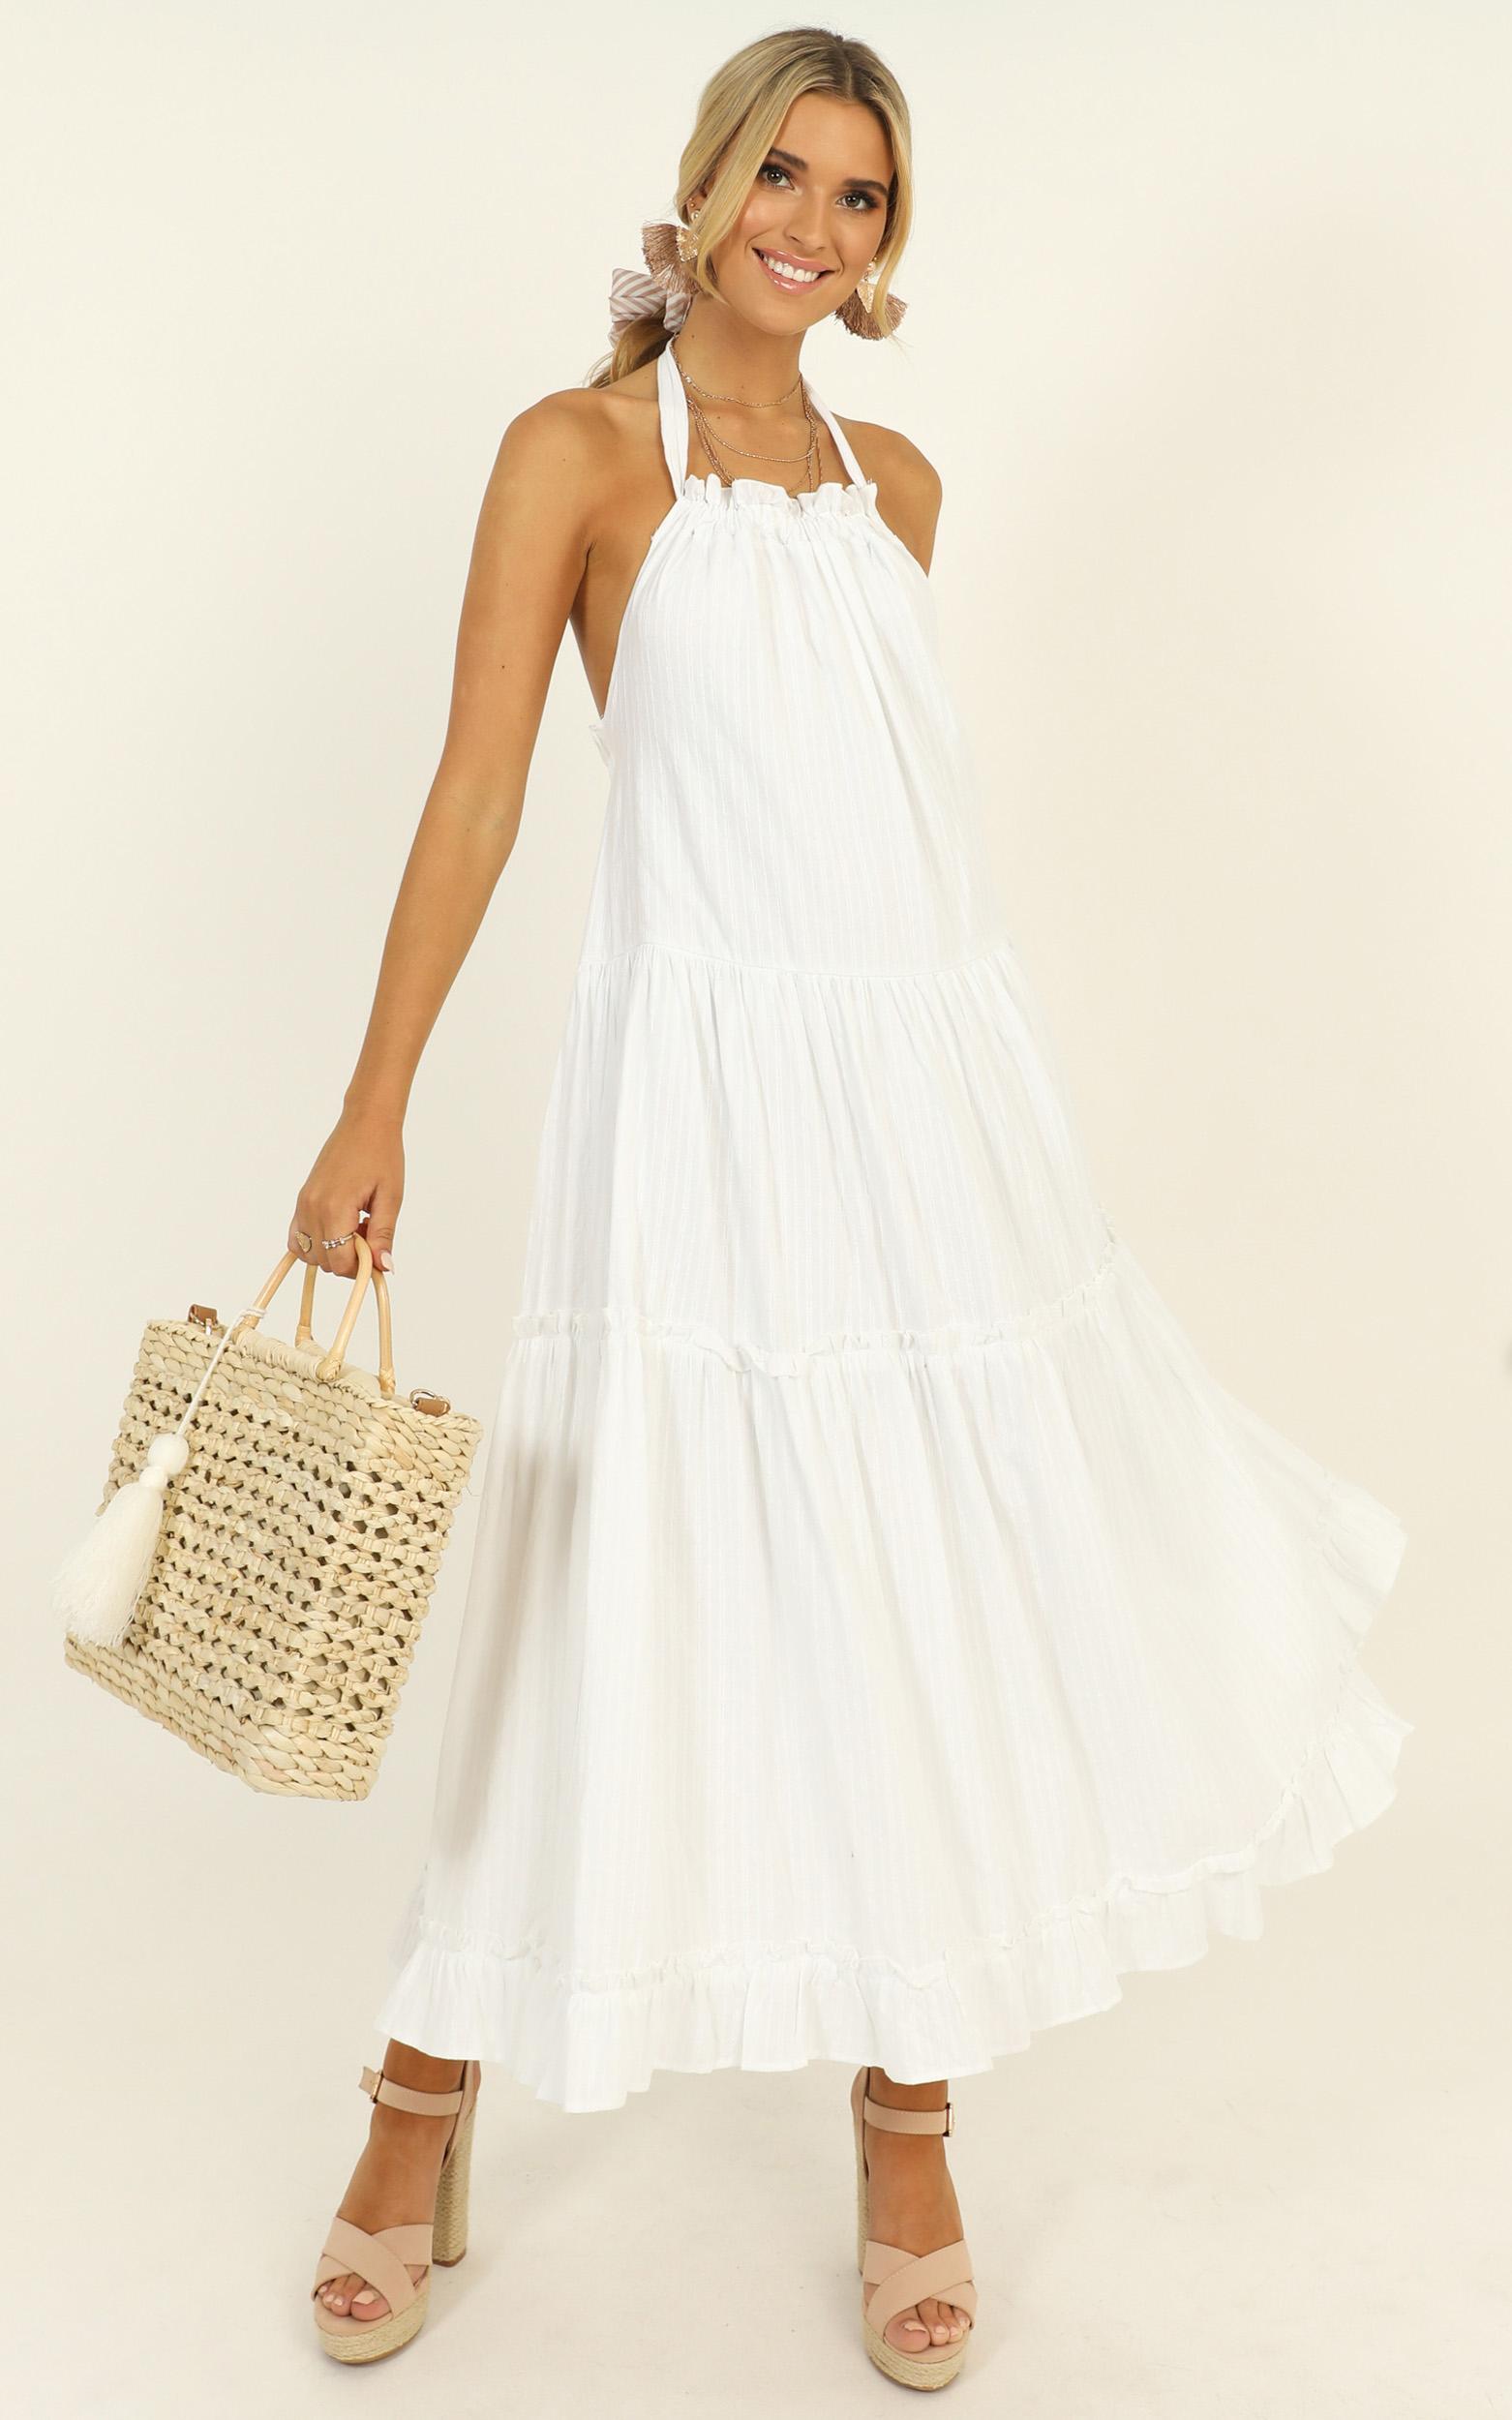 Where You Belong Dress in white - 14 (XL), White, hi-res image number null